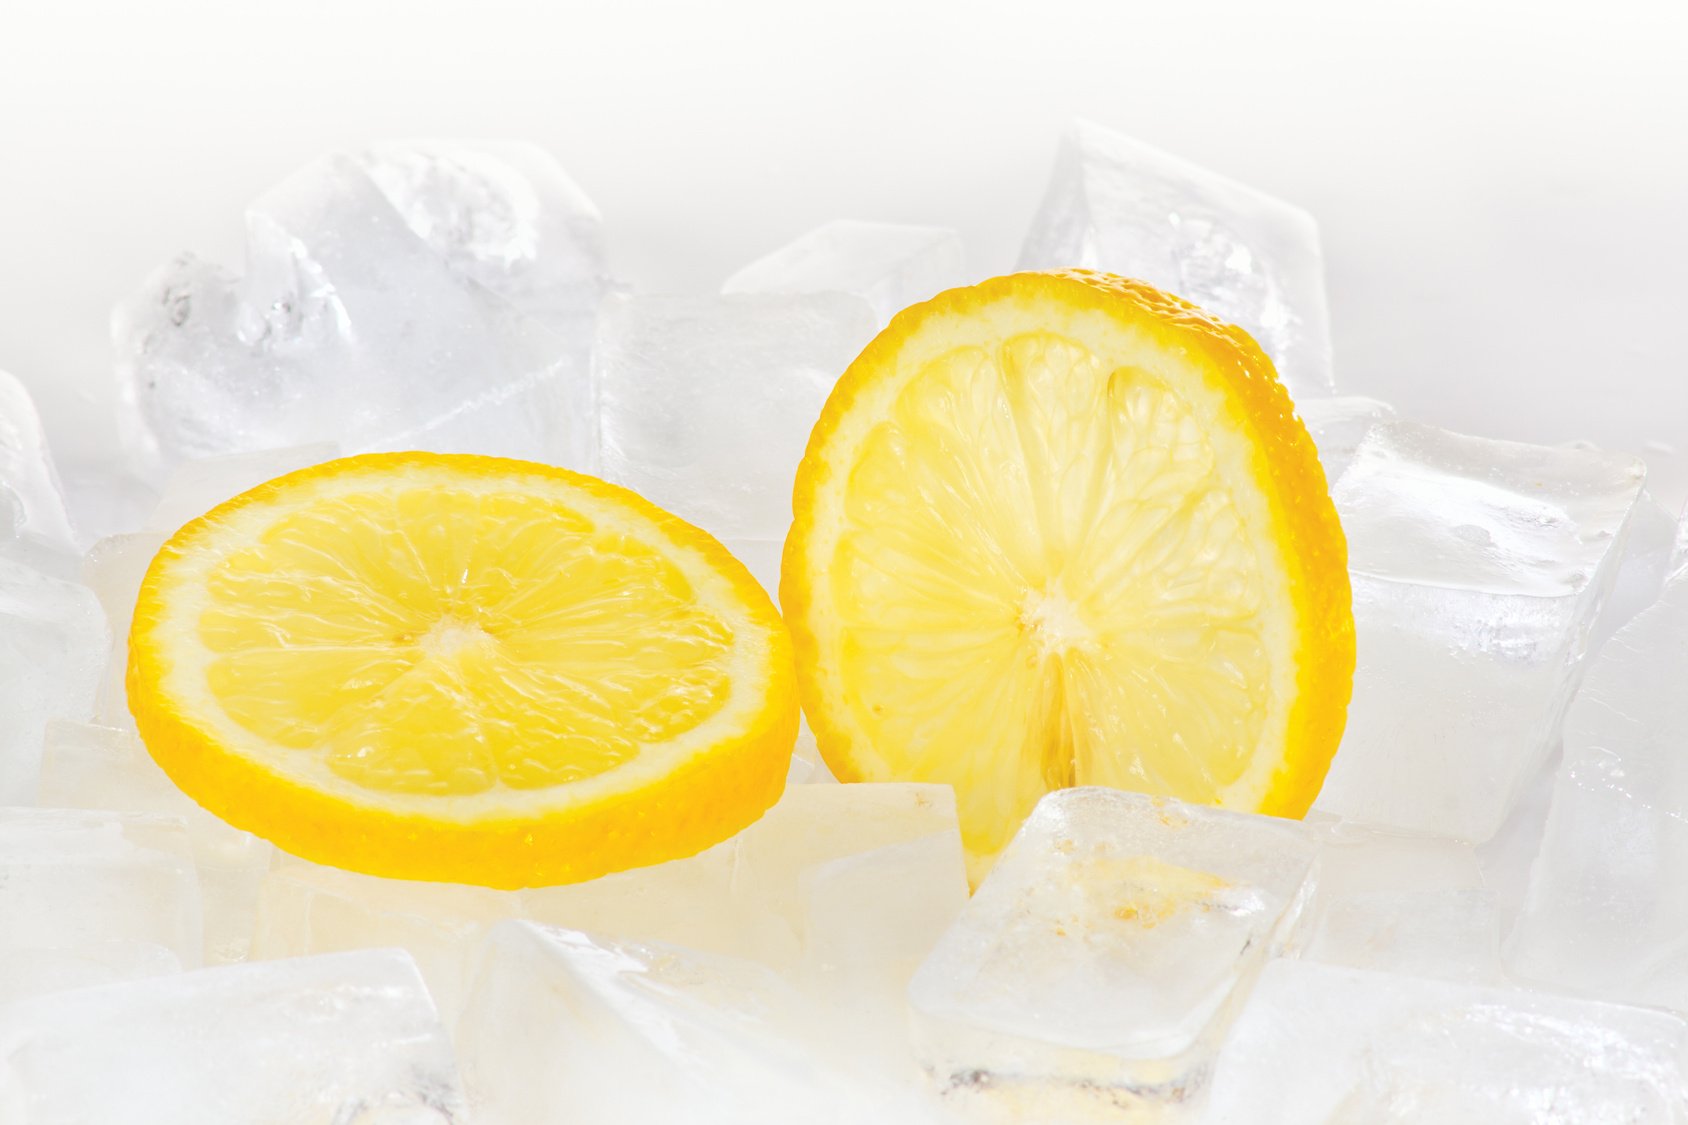 Two slices of lemon on ice cubes